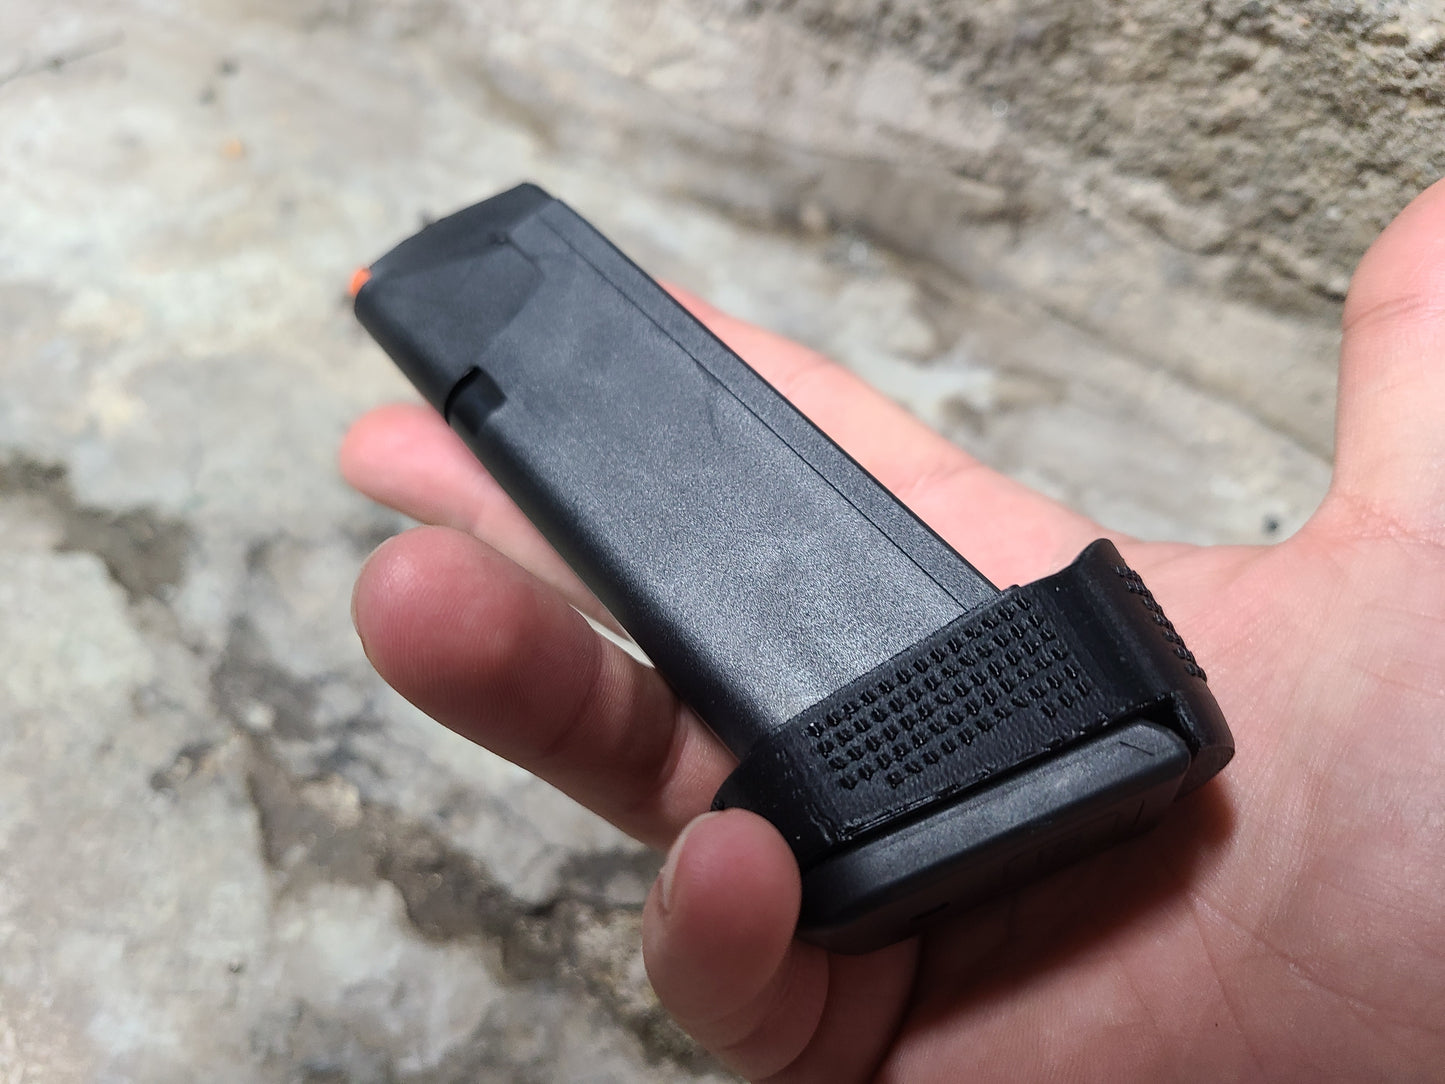 Glock 19 magazine adapter lets you run 17 round magazines in your compact Glock 19